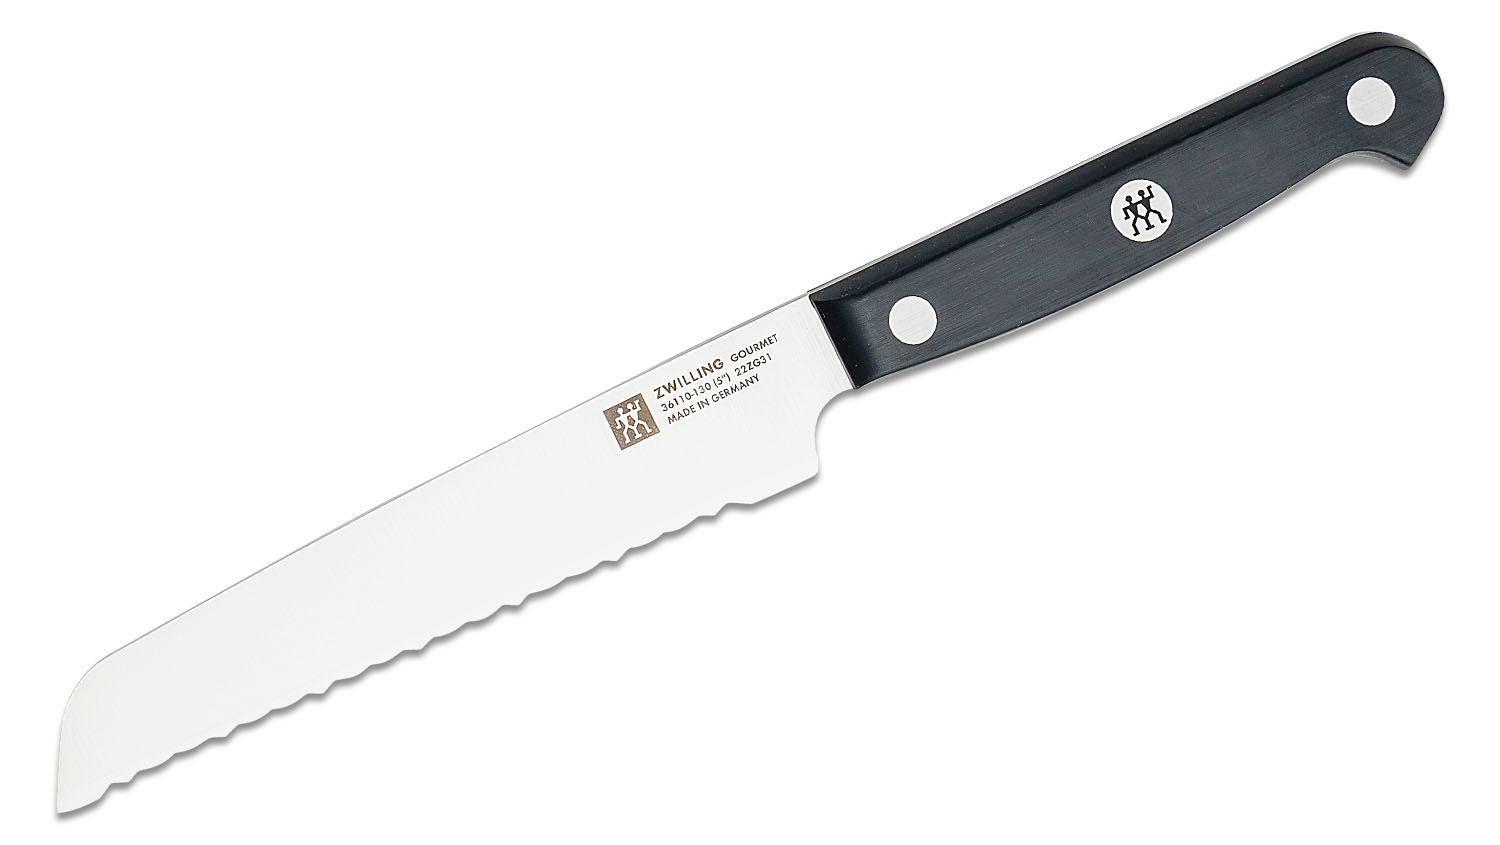 ZWILLING Gourmet 4-inch Paring Knife, 4-inch - Foods Co.